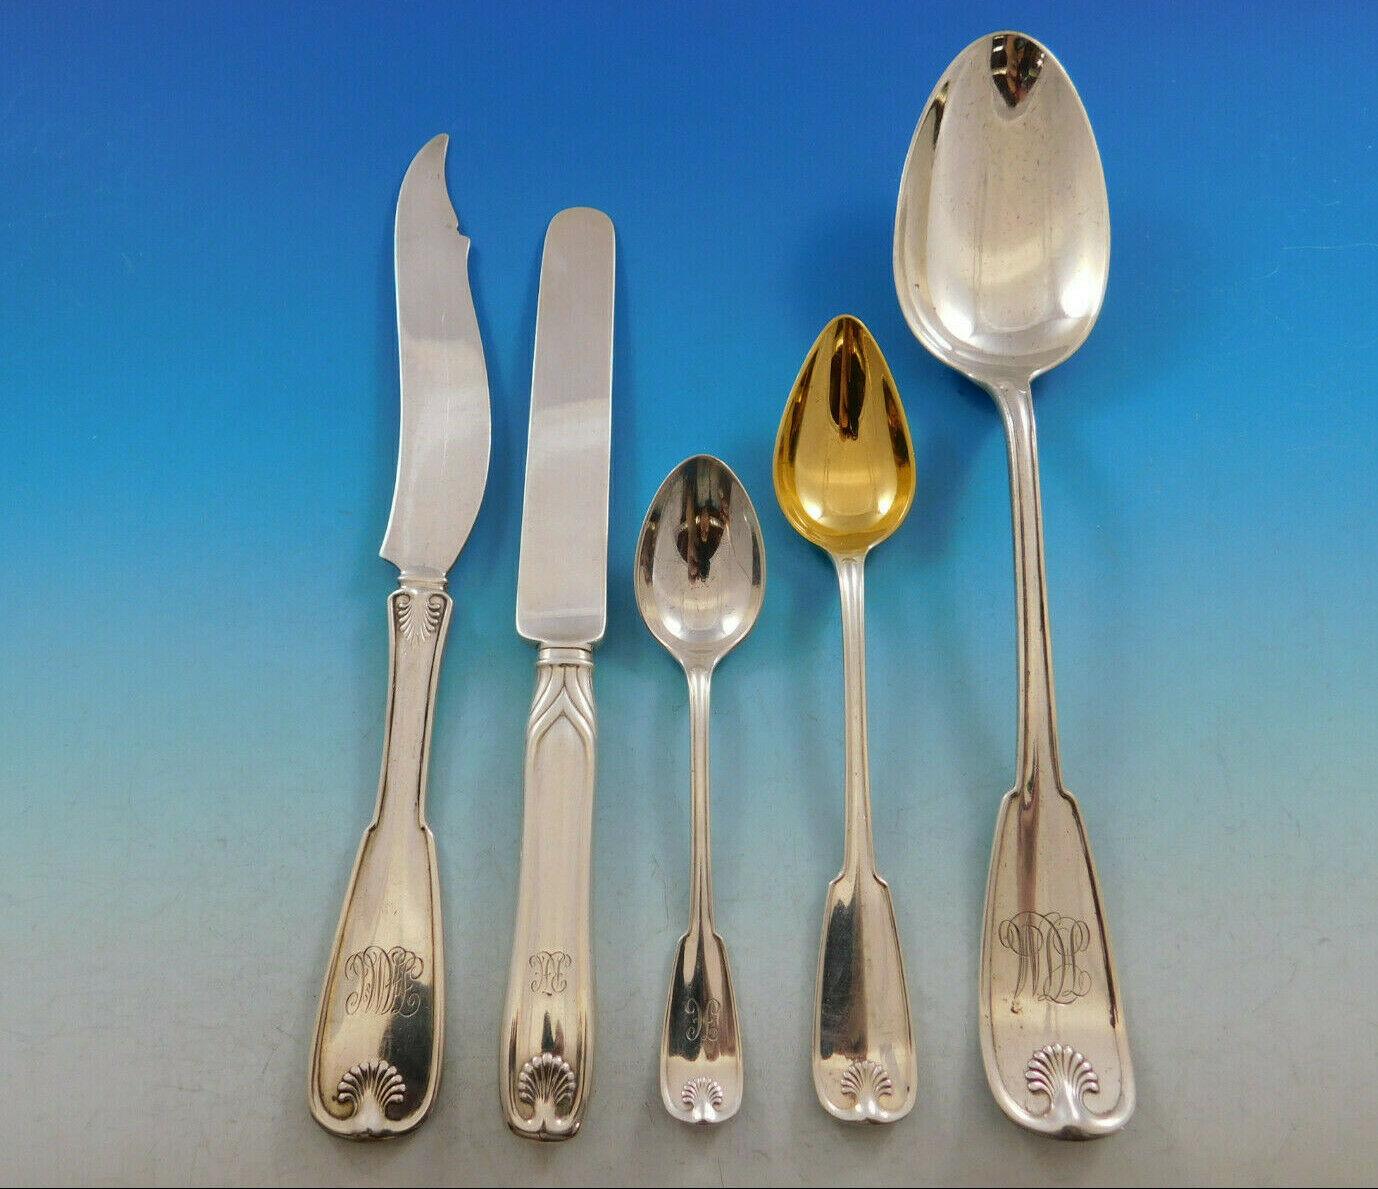 Exceptional monumental palm by Tiffany & Co. sterling silver flatware set, 286 pieces. This pattern was designed by Edward C. Moore and introduced in the year 1871. This set includes:

18 dinner knives, 10 1/2